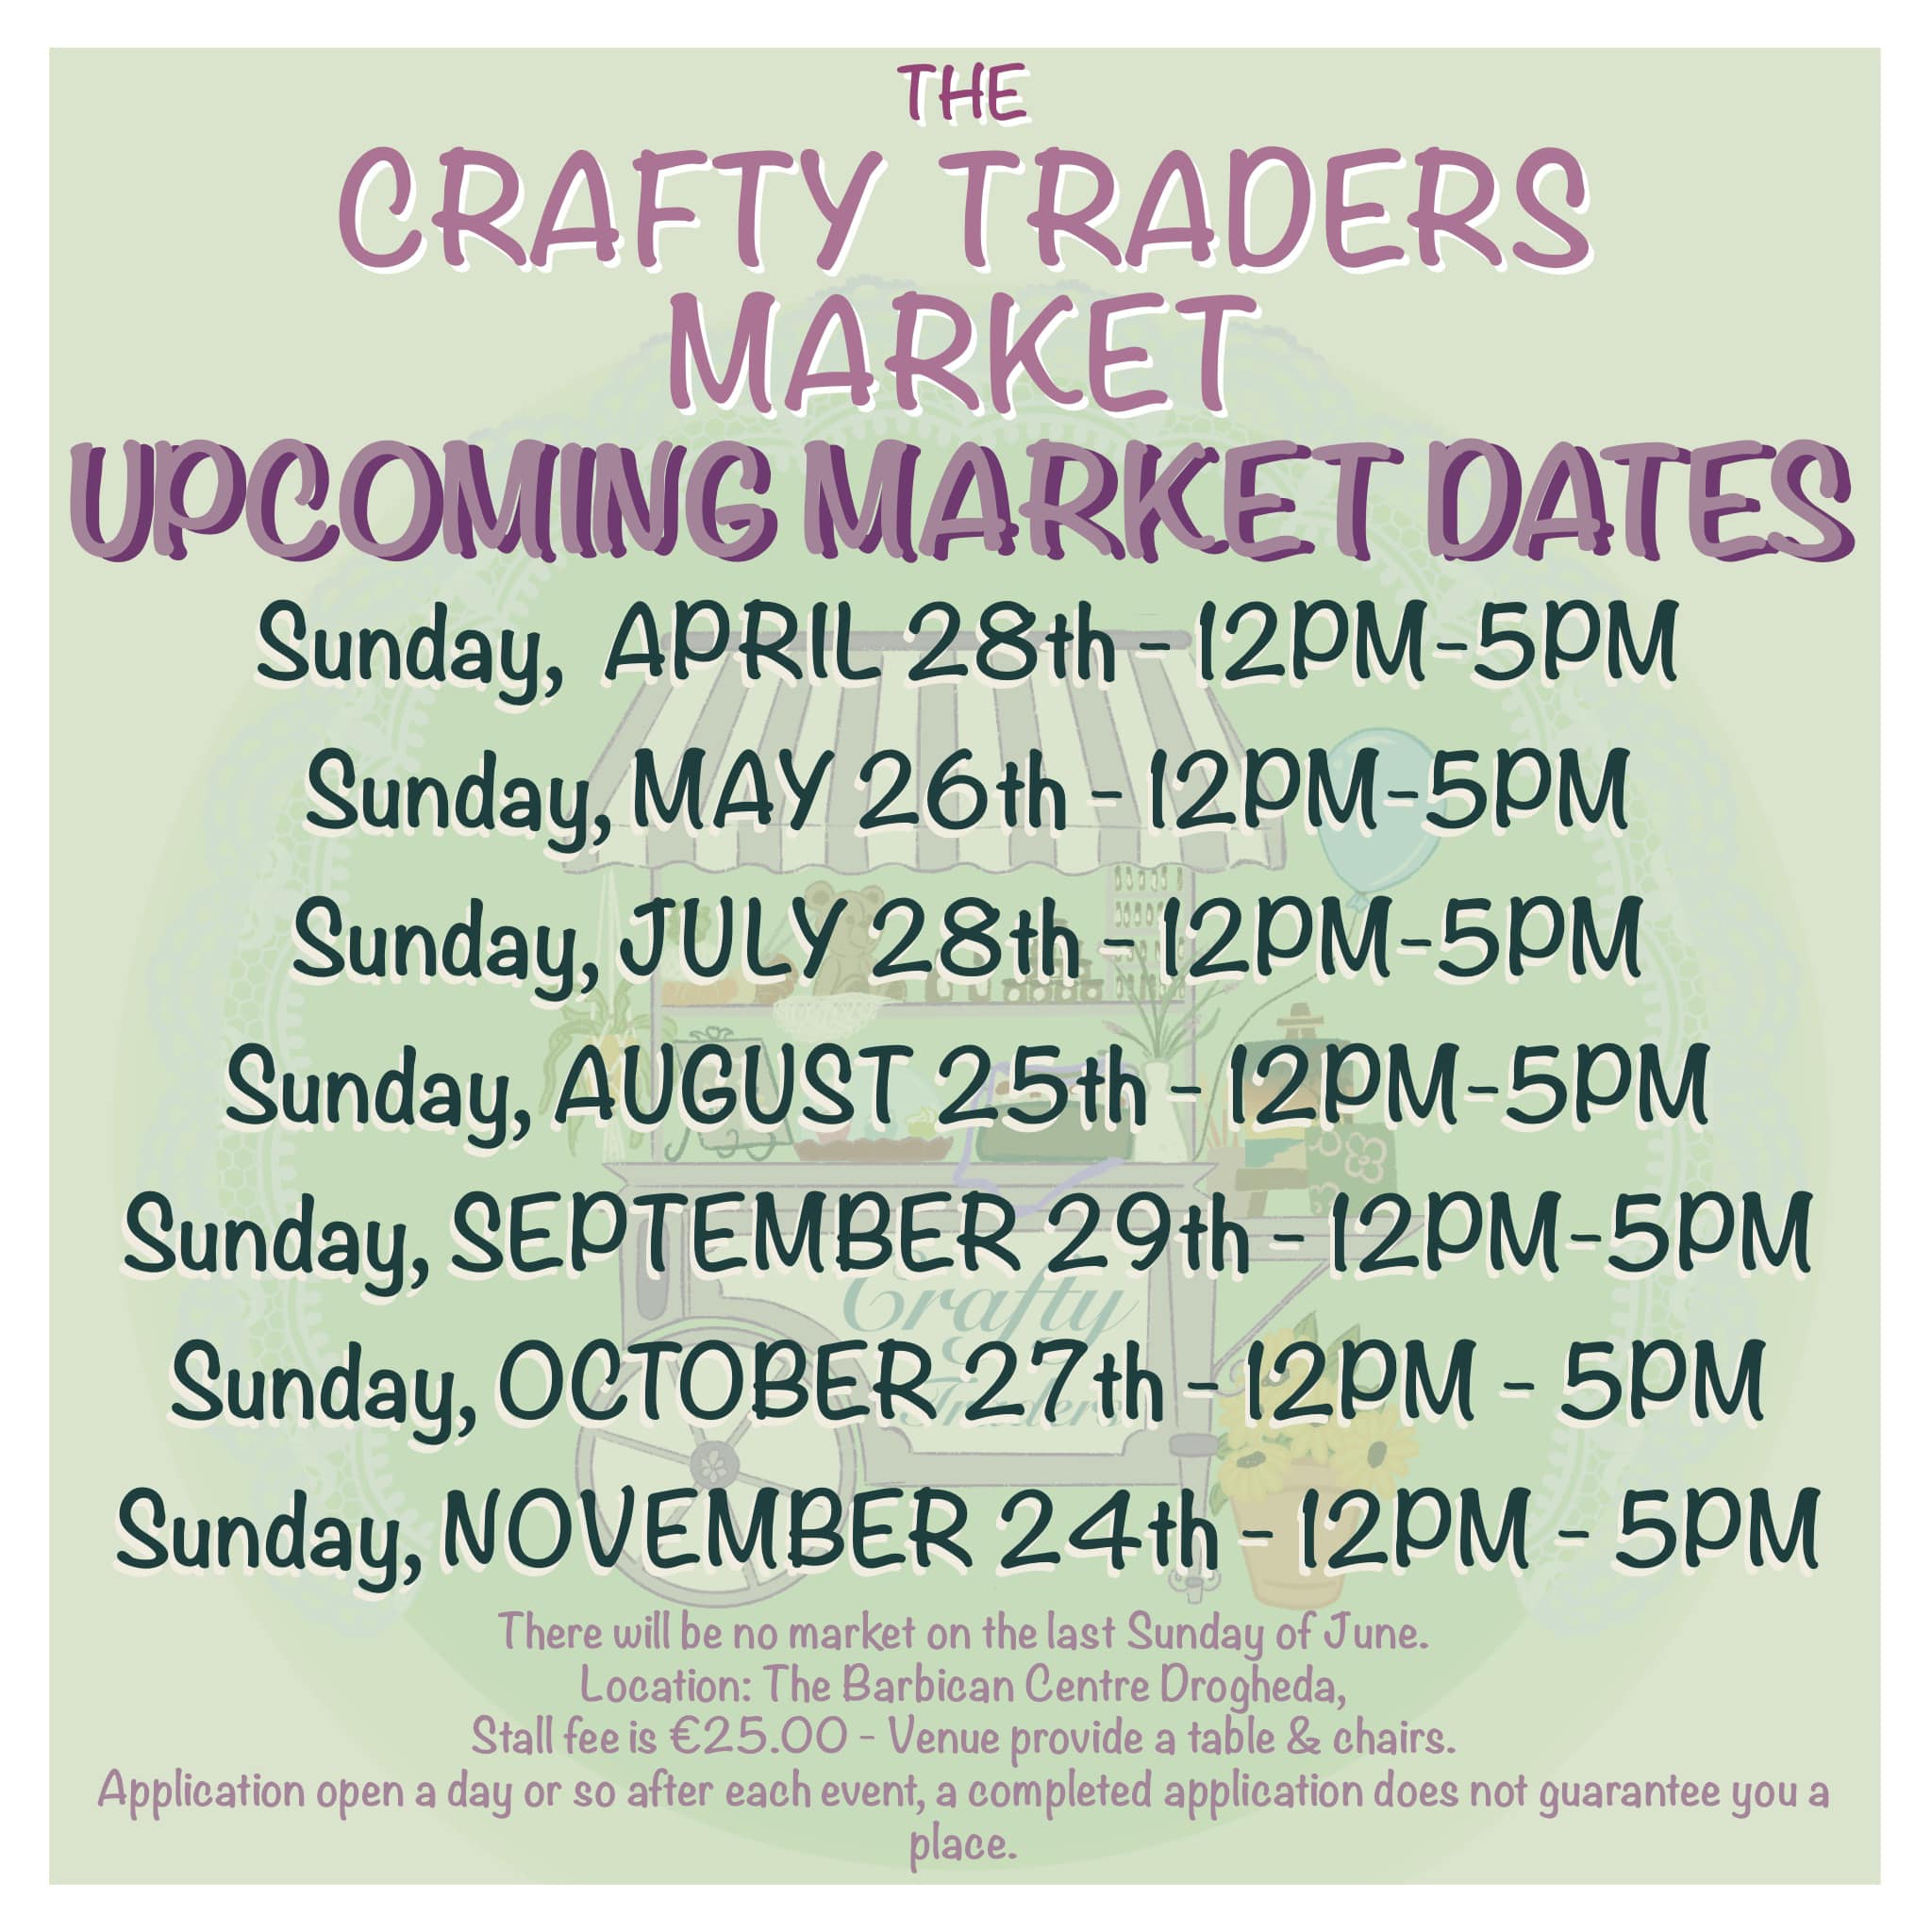 The Crafty Traders Market